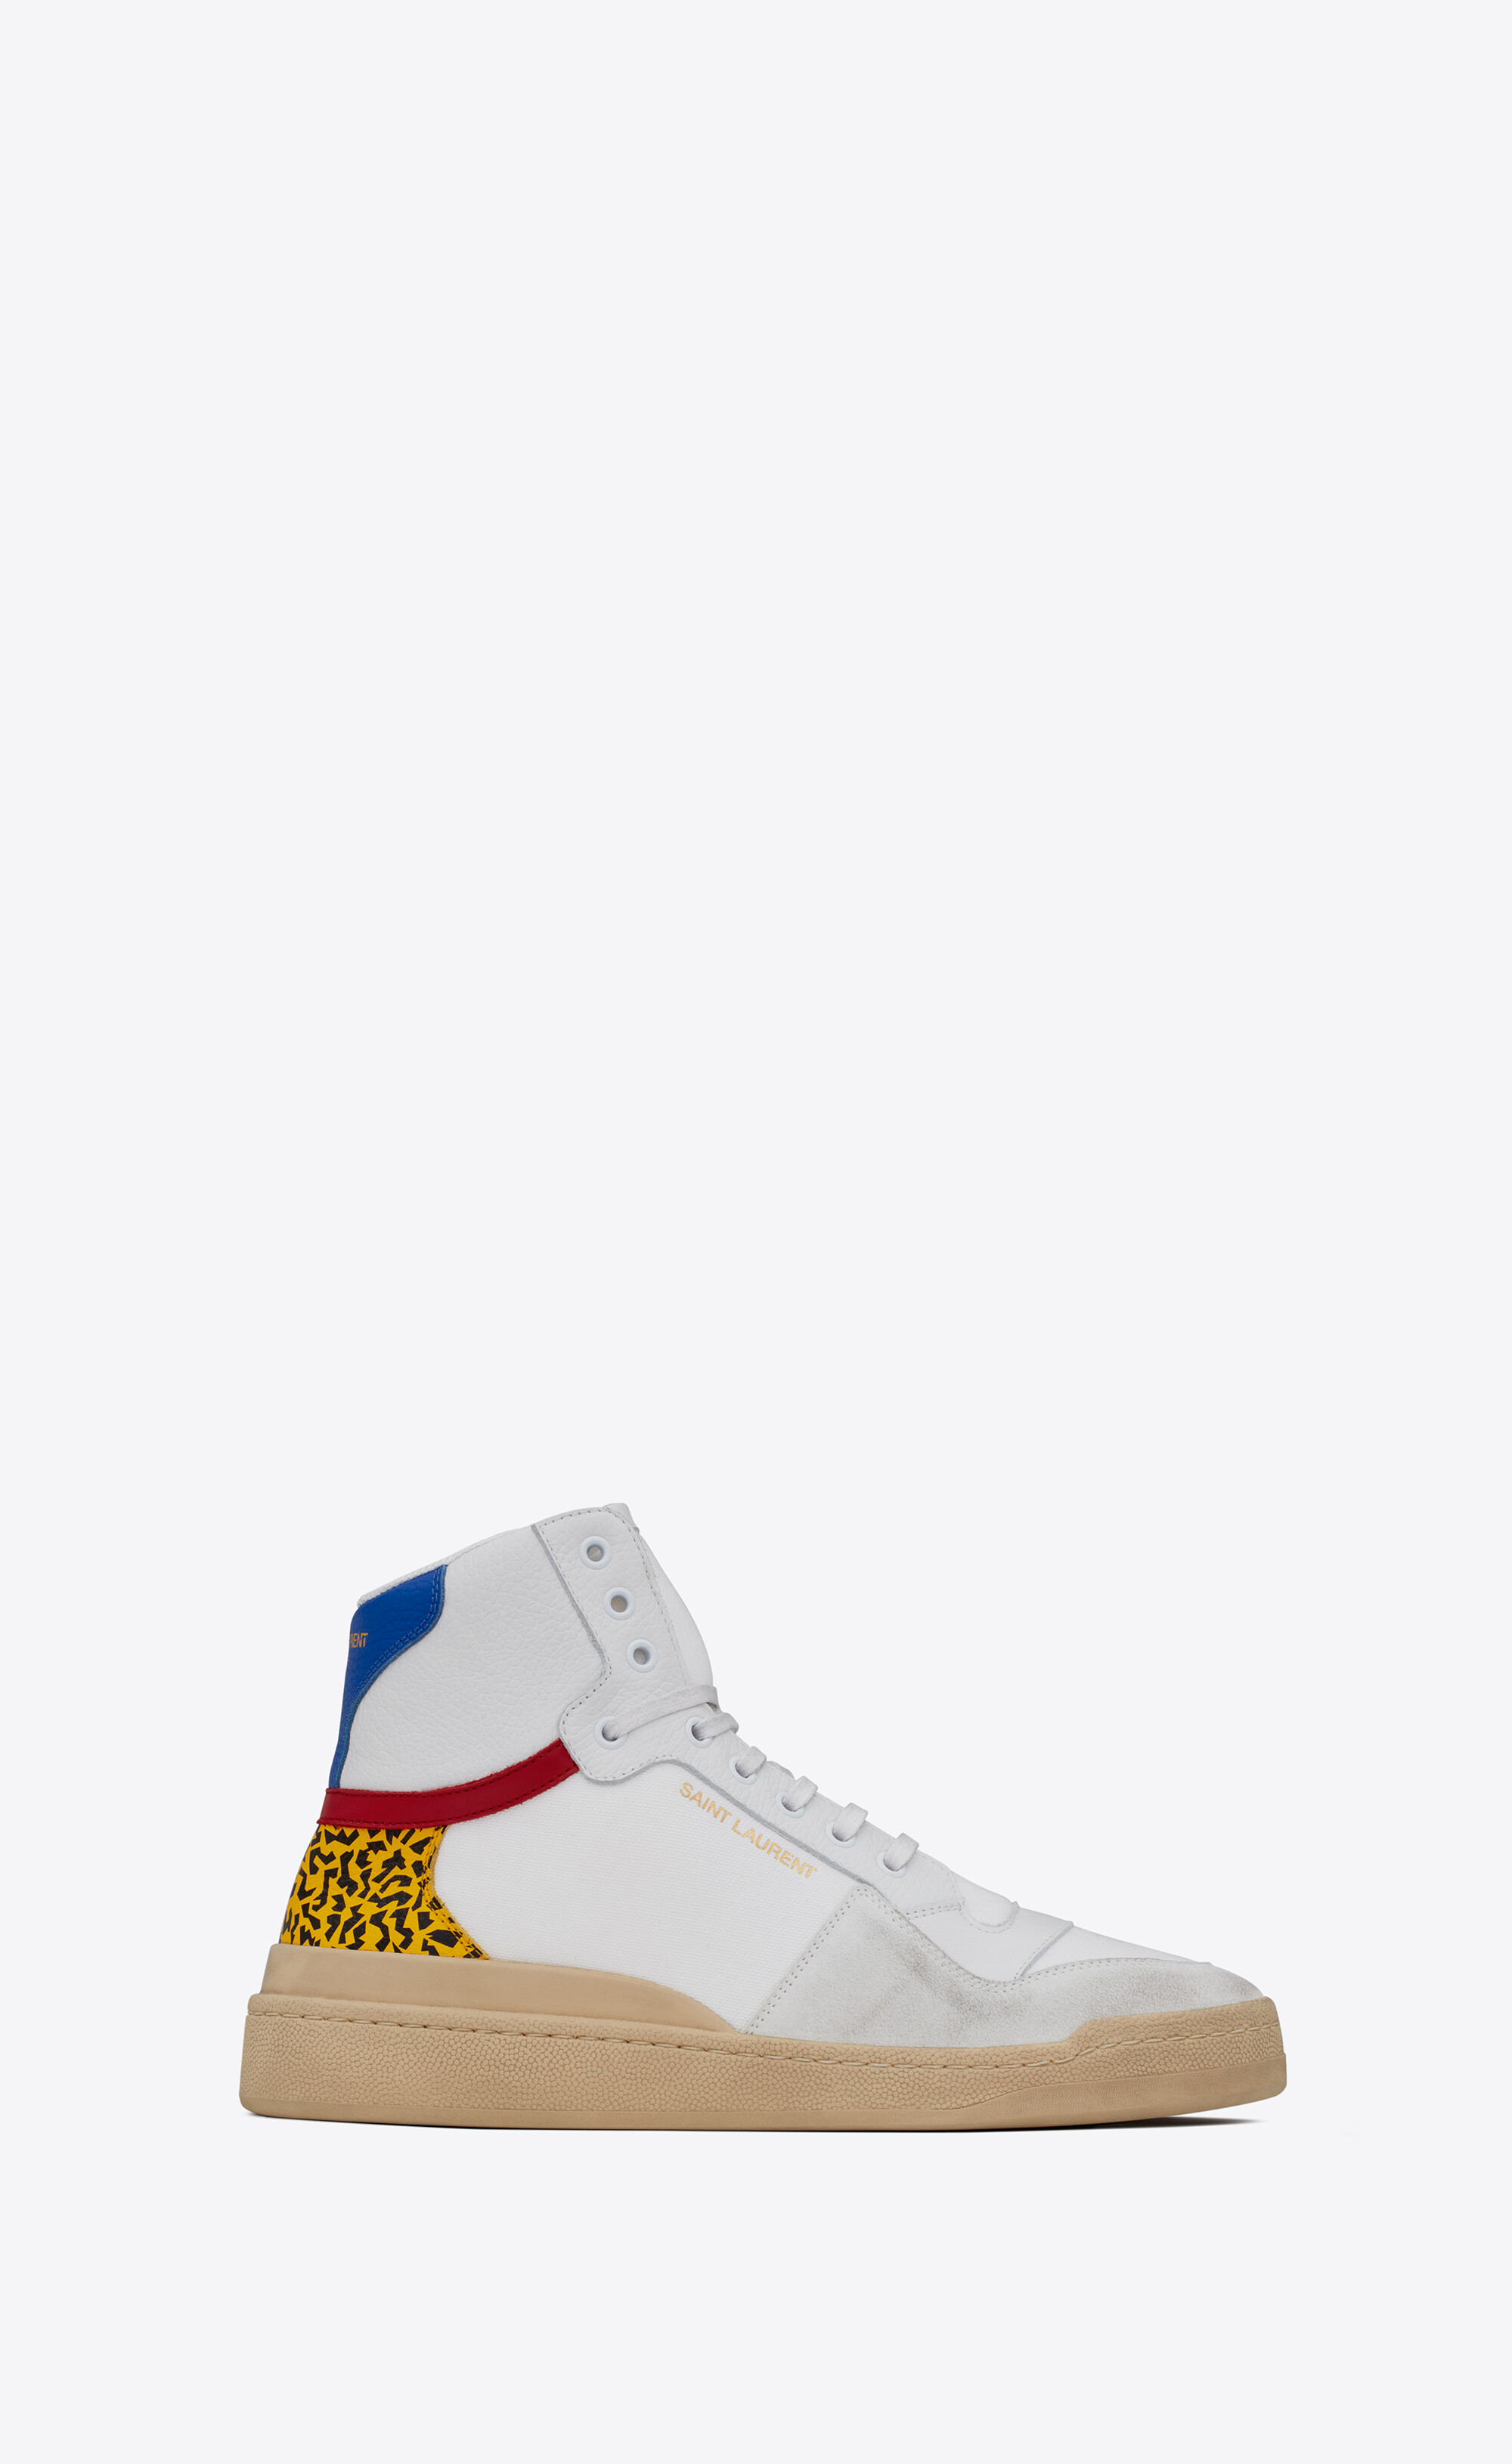 SL24 mid-top sneakers in canvas, leather and suede | Saint Laurent 